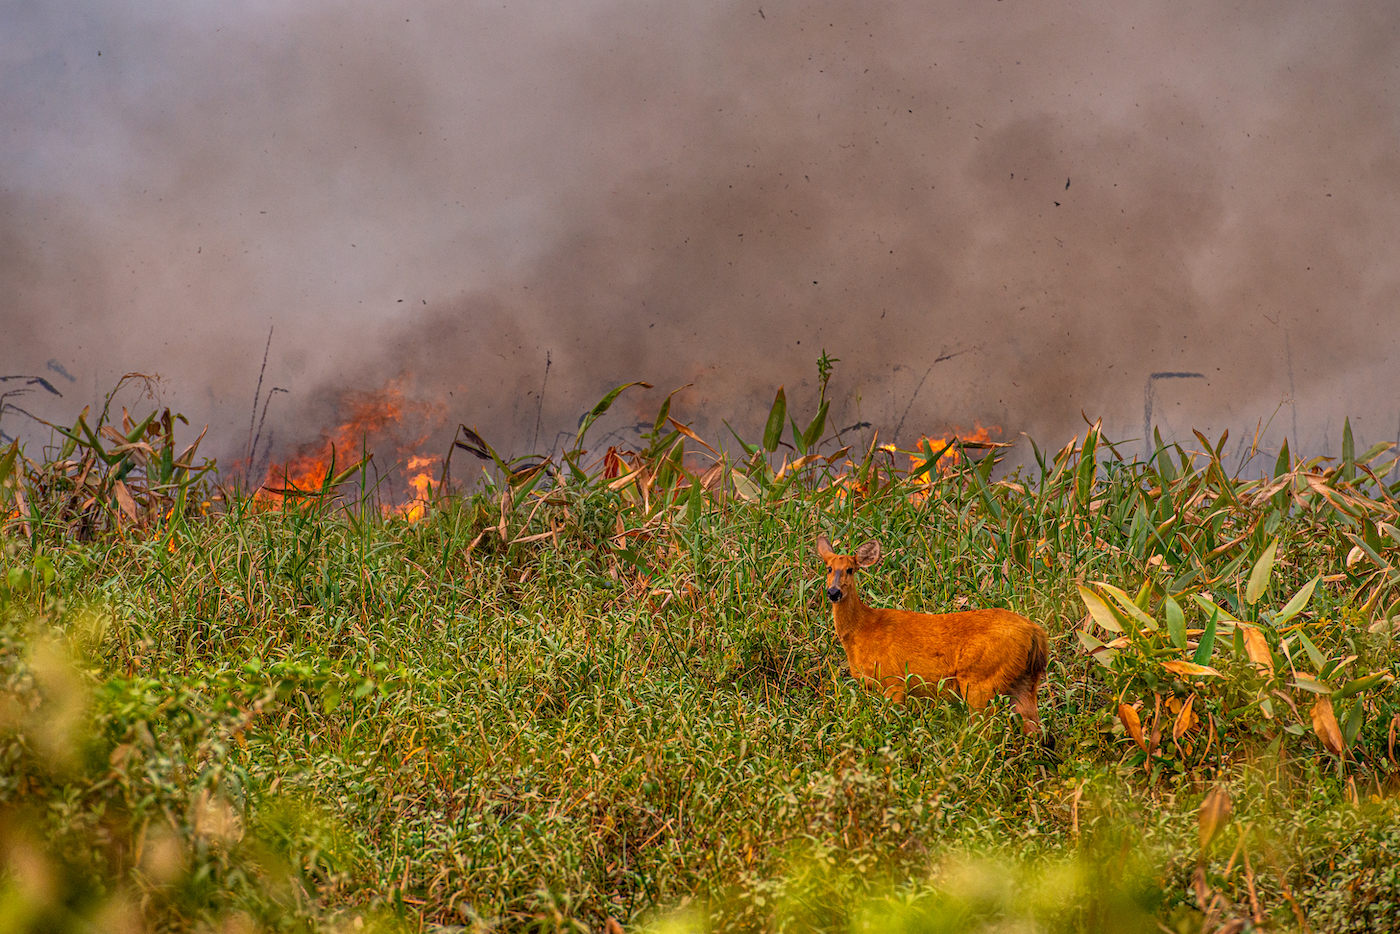 A deer looks on while a forest fire rages in the Pantanal wetlands.